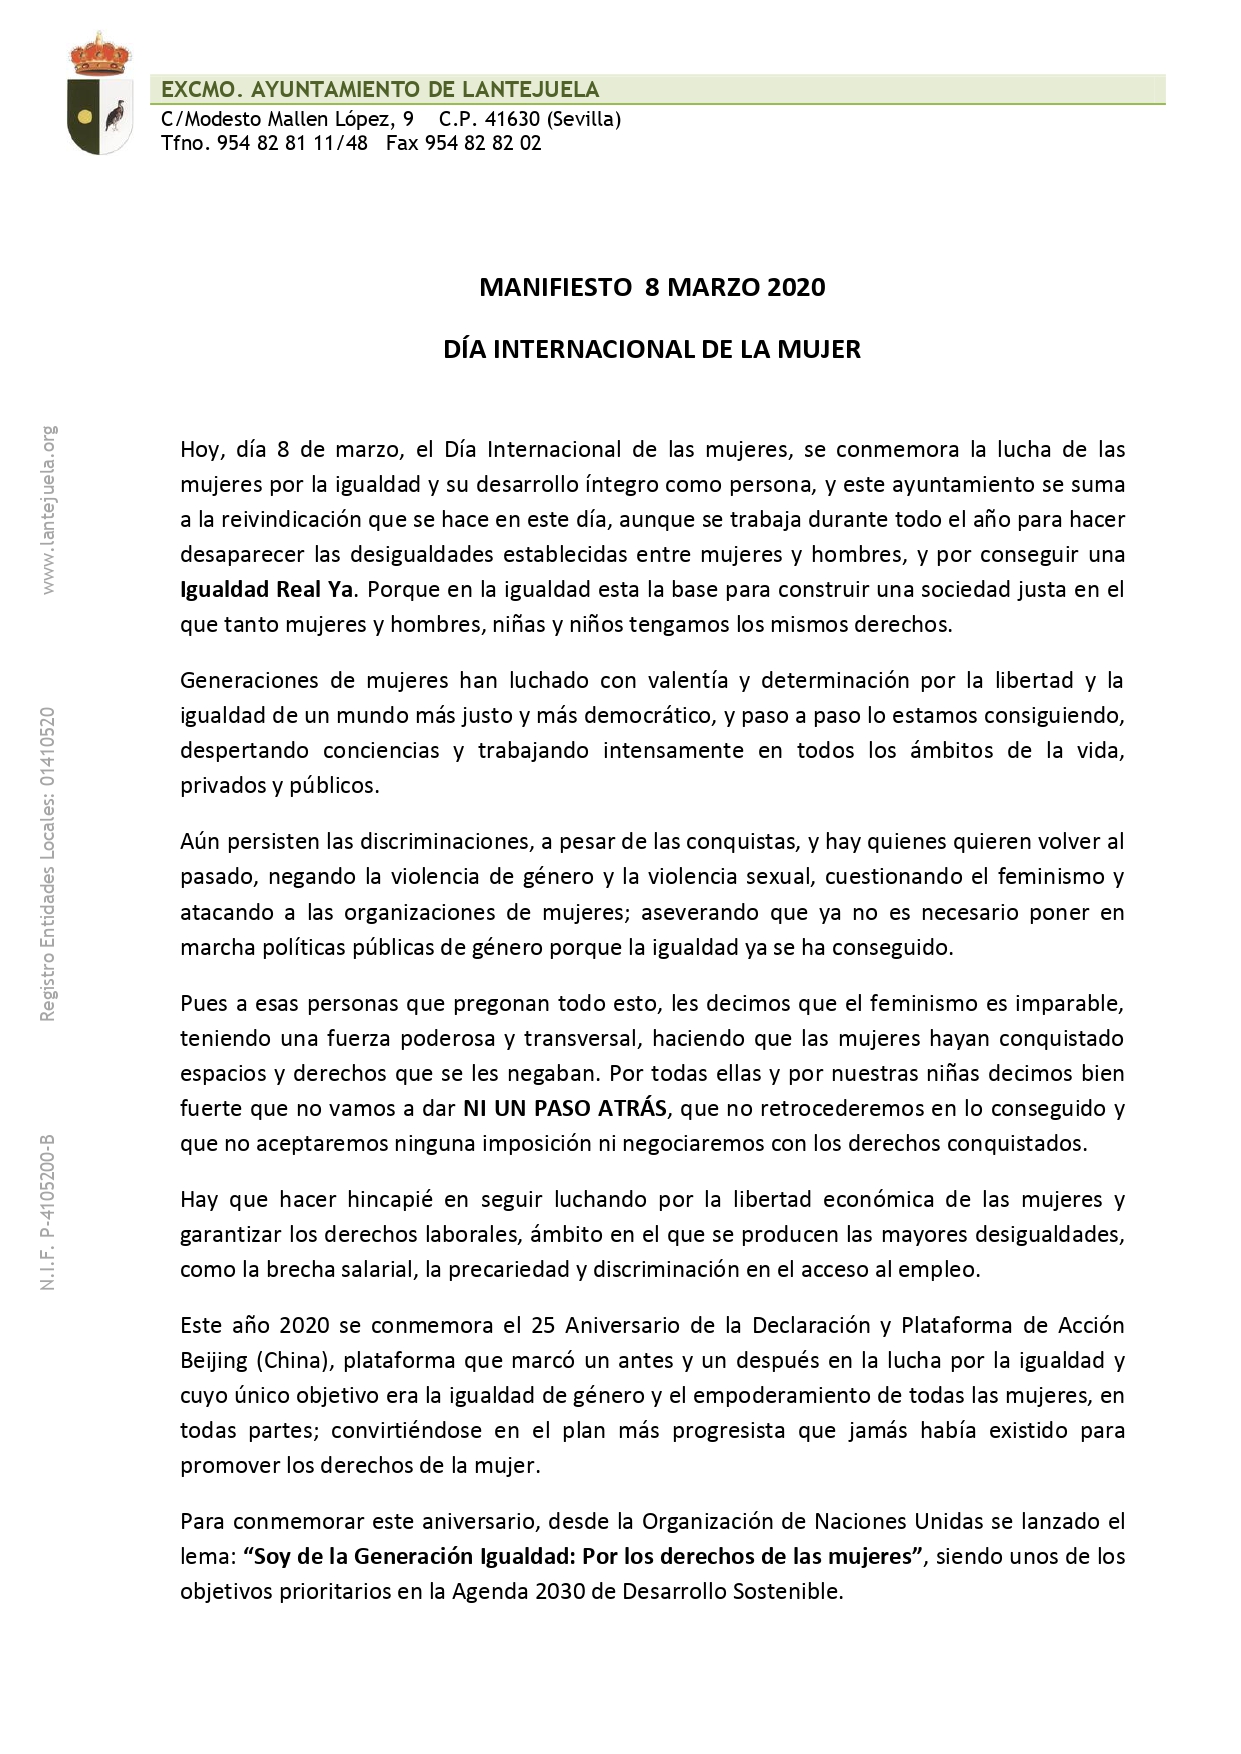 MANIFIESTO 8 MARZO 2020_pages-to-jpg-0001